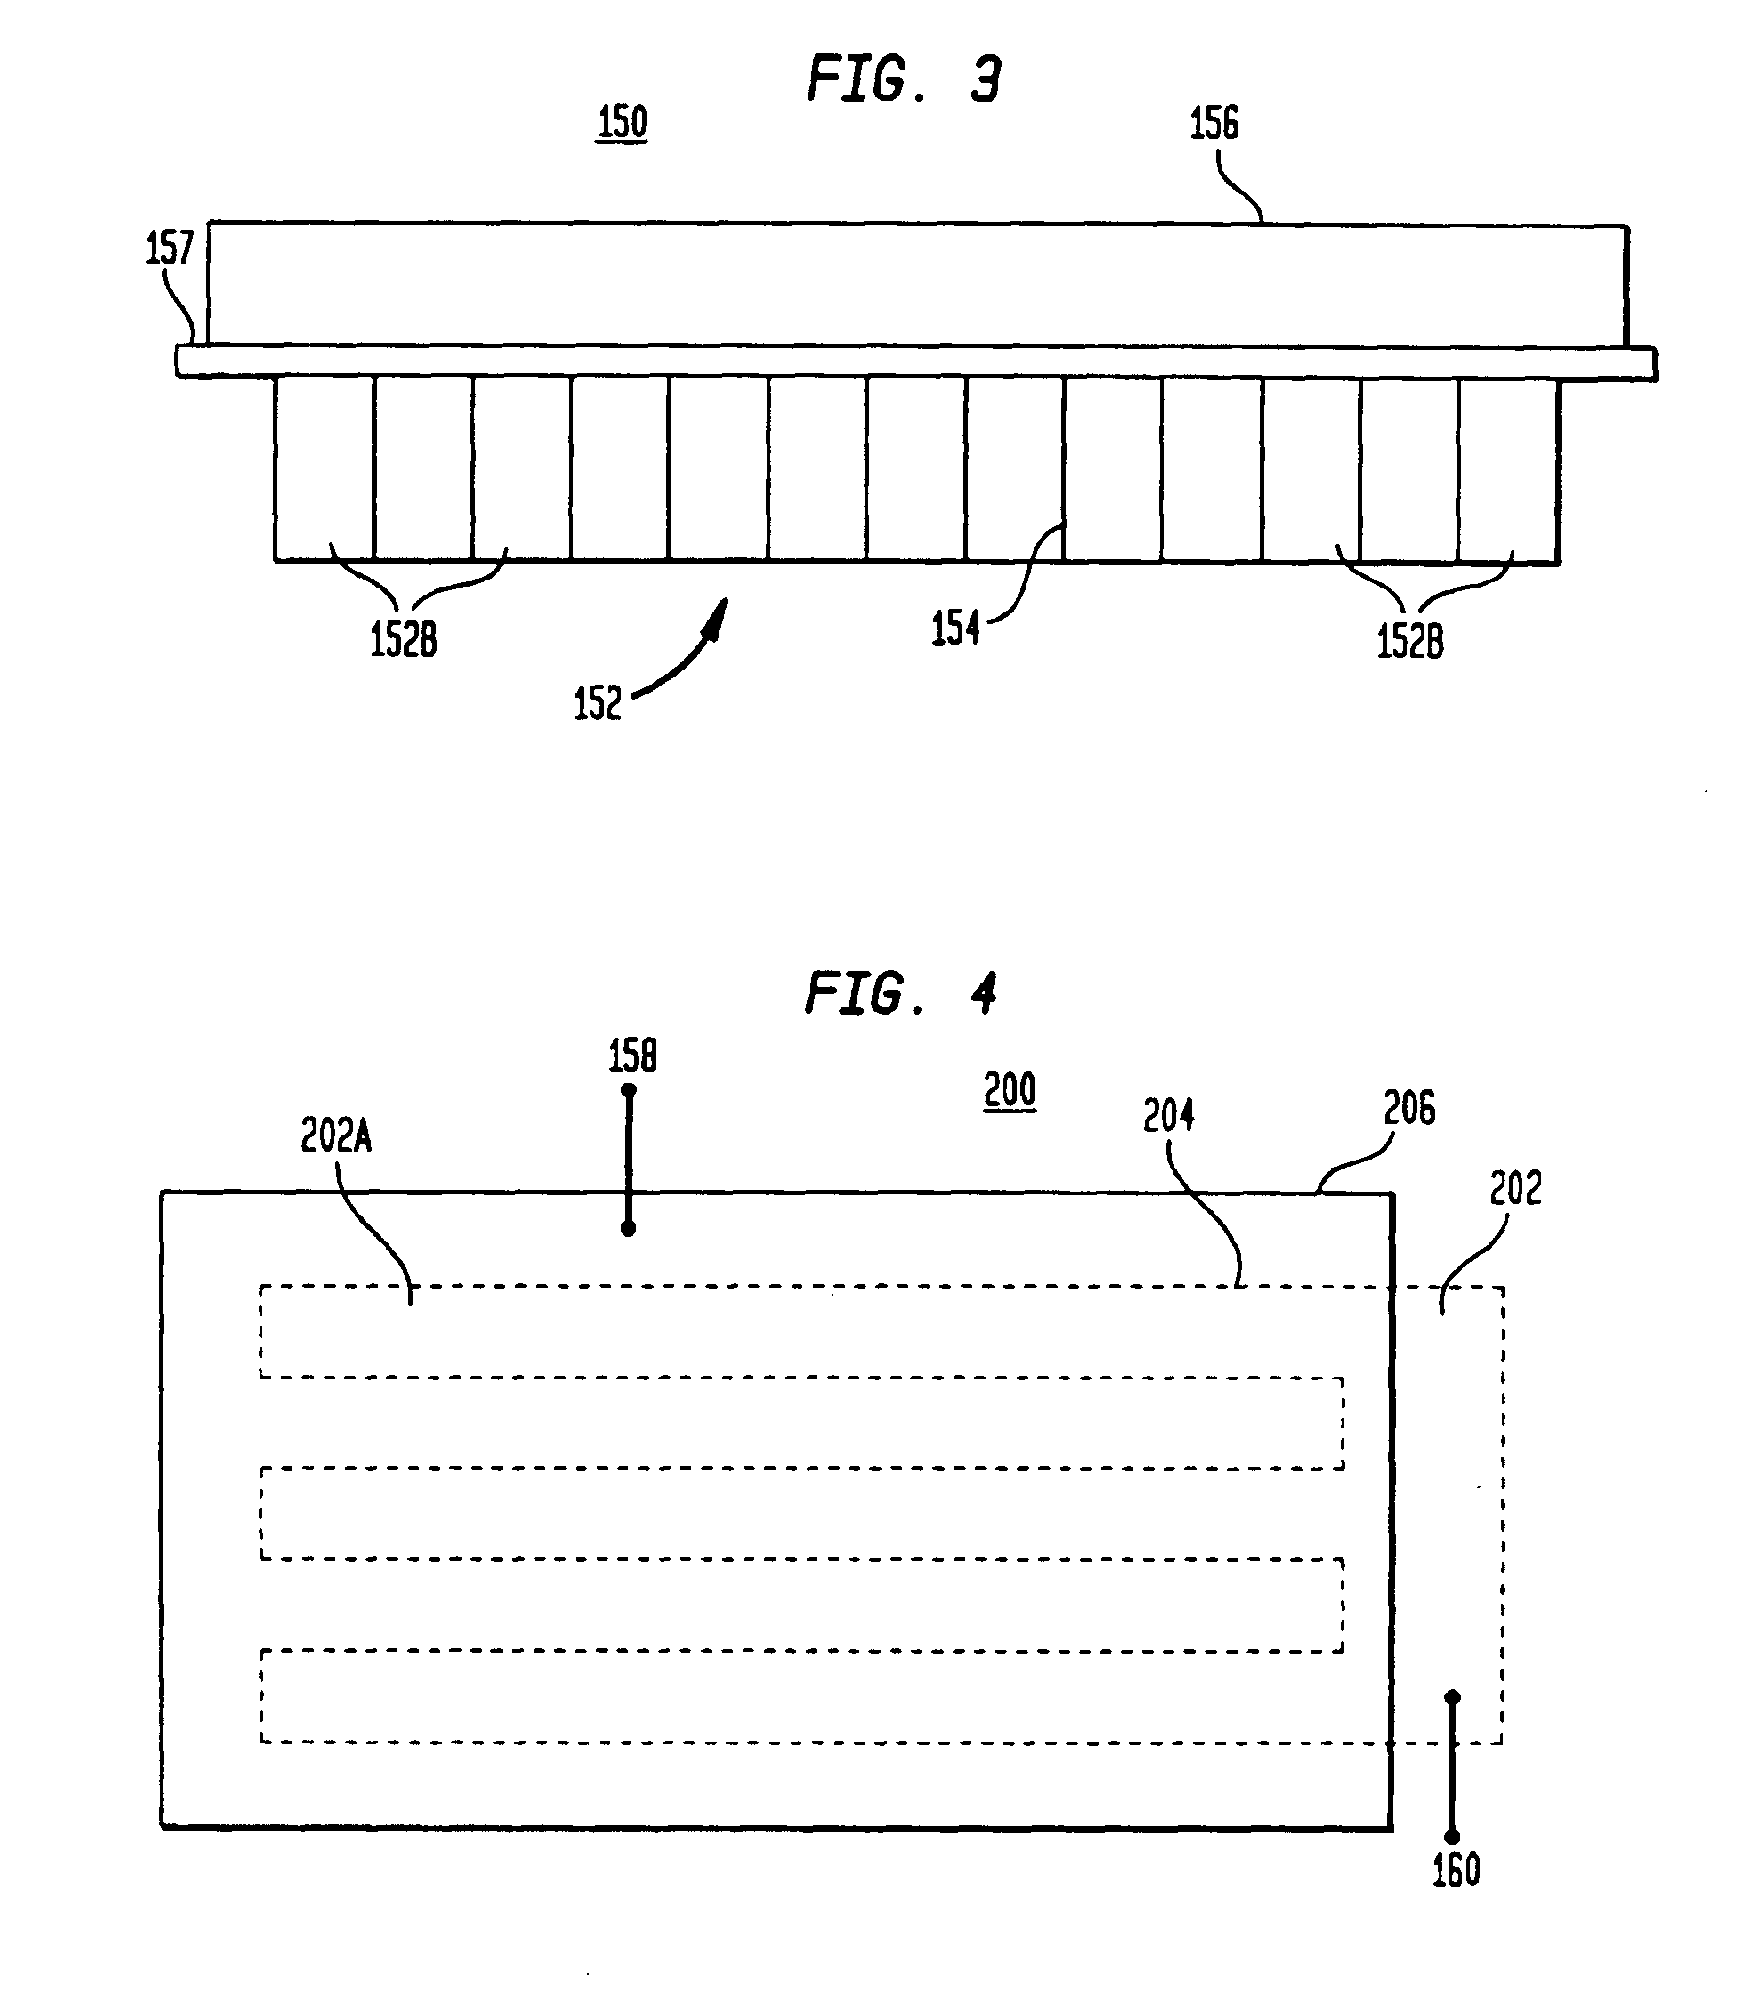 Methods and apparatus for providing an antifuse function